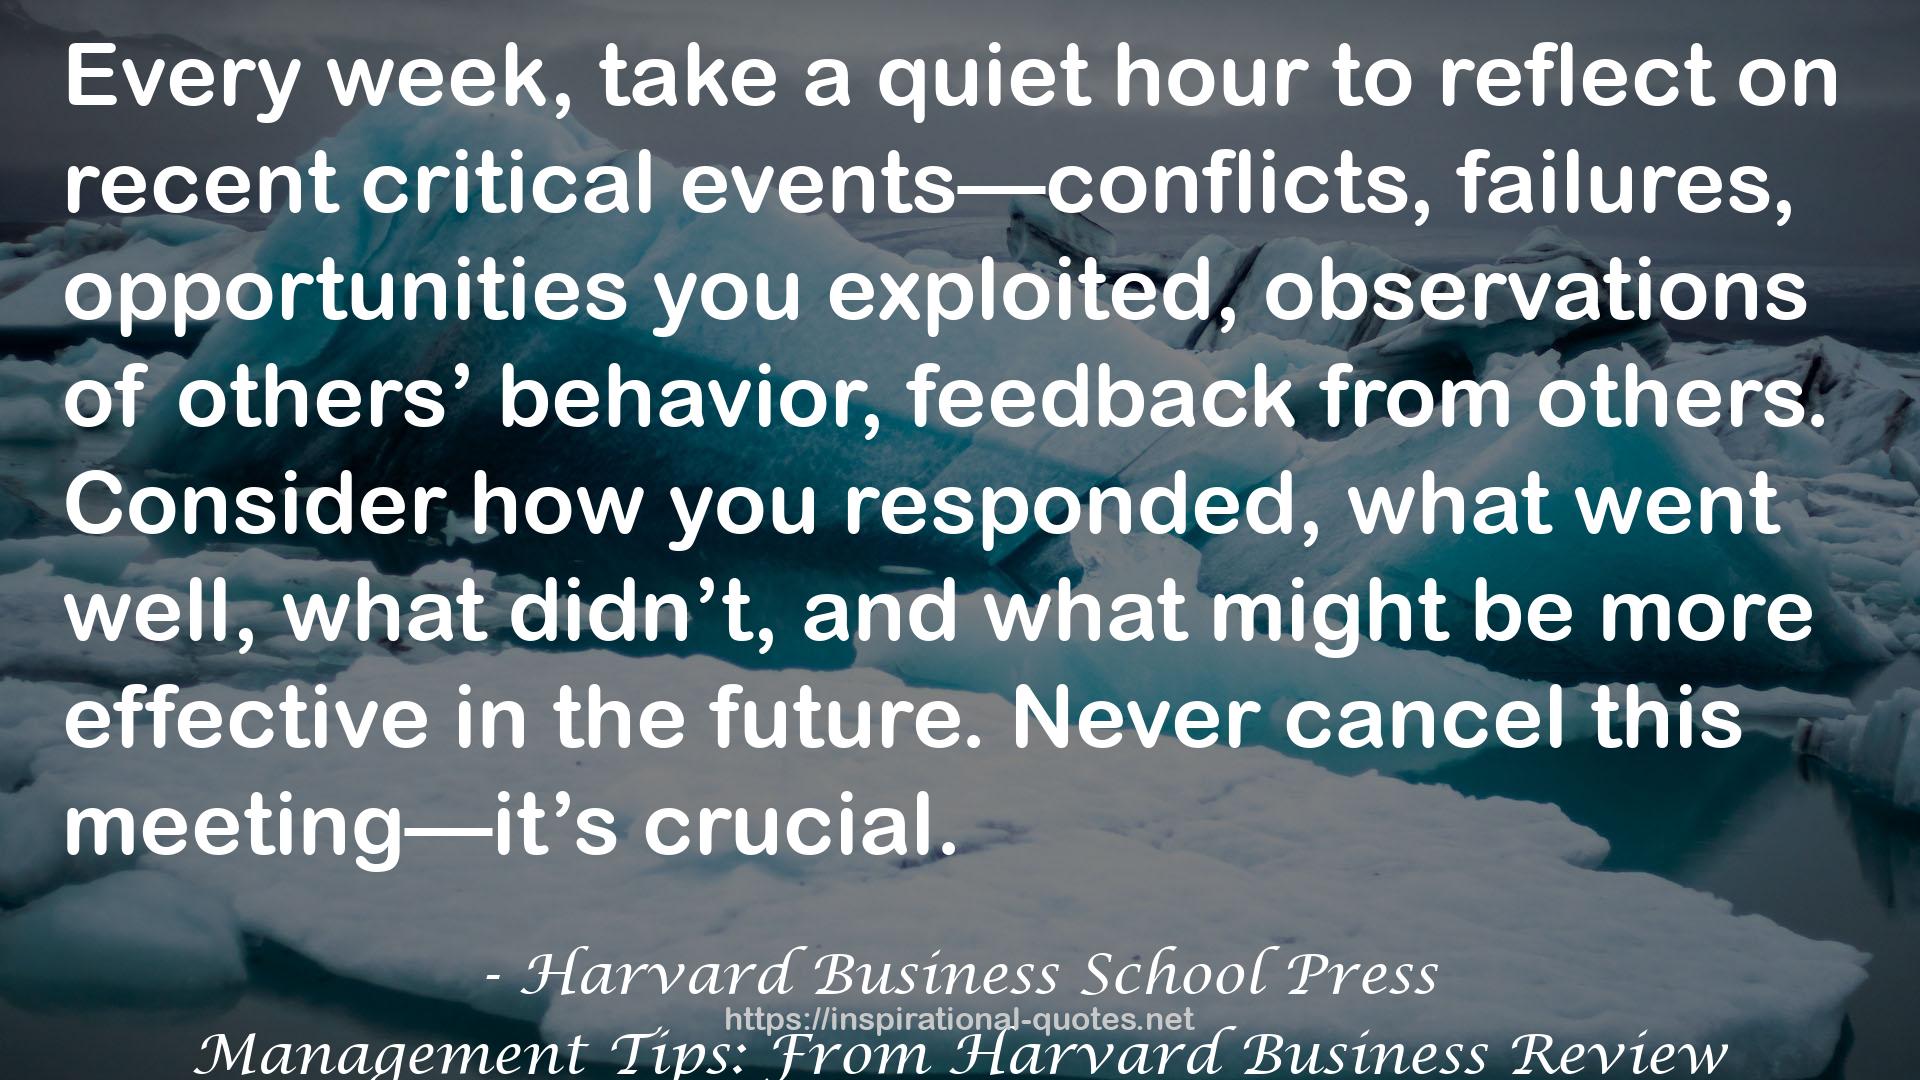 Management Tips: From Harvard Business Review QUOTES